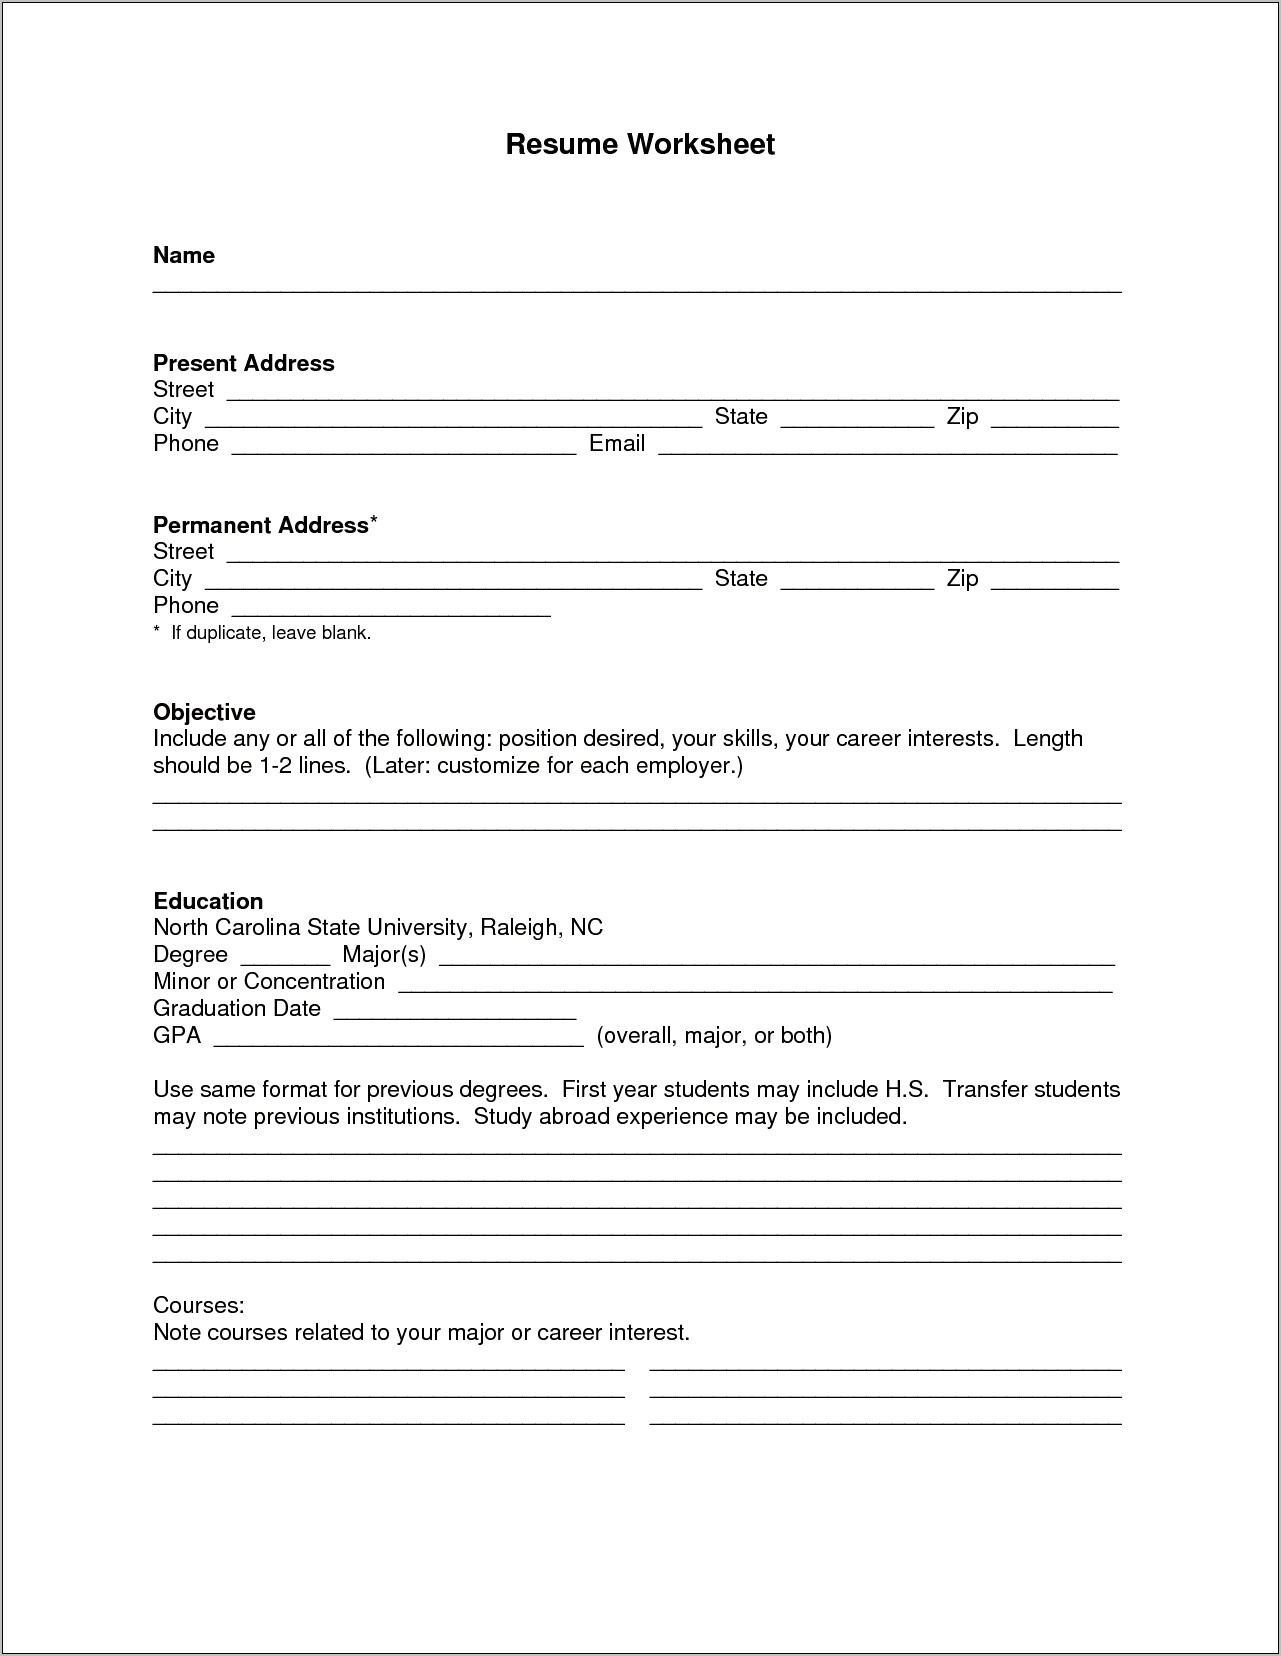 free-fill-in-the-blank-printable-resume-resume-example-gallery